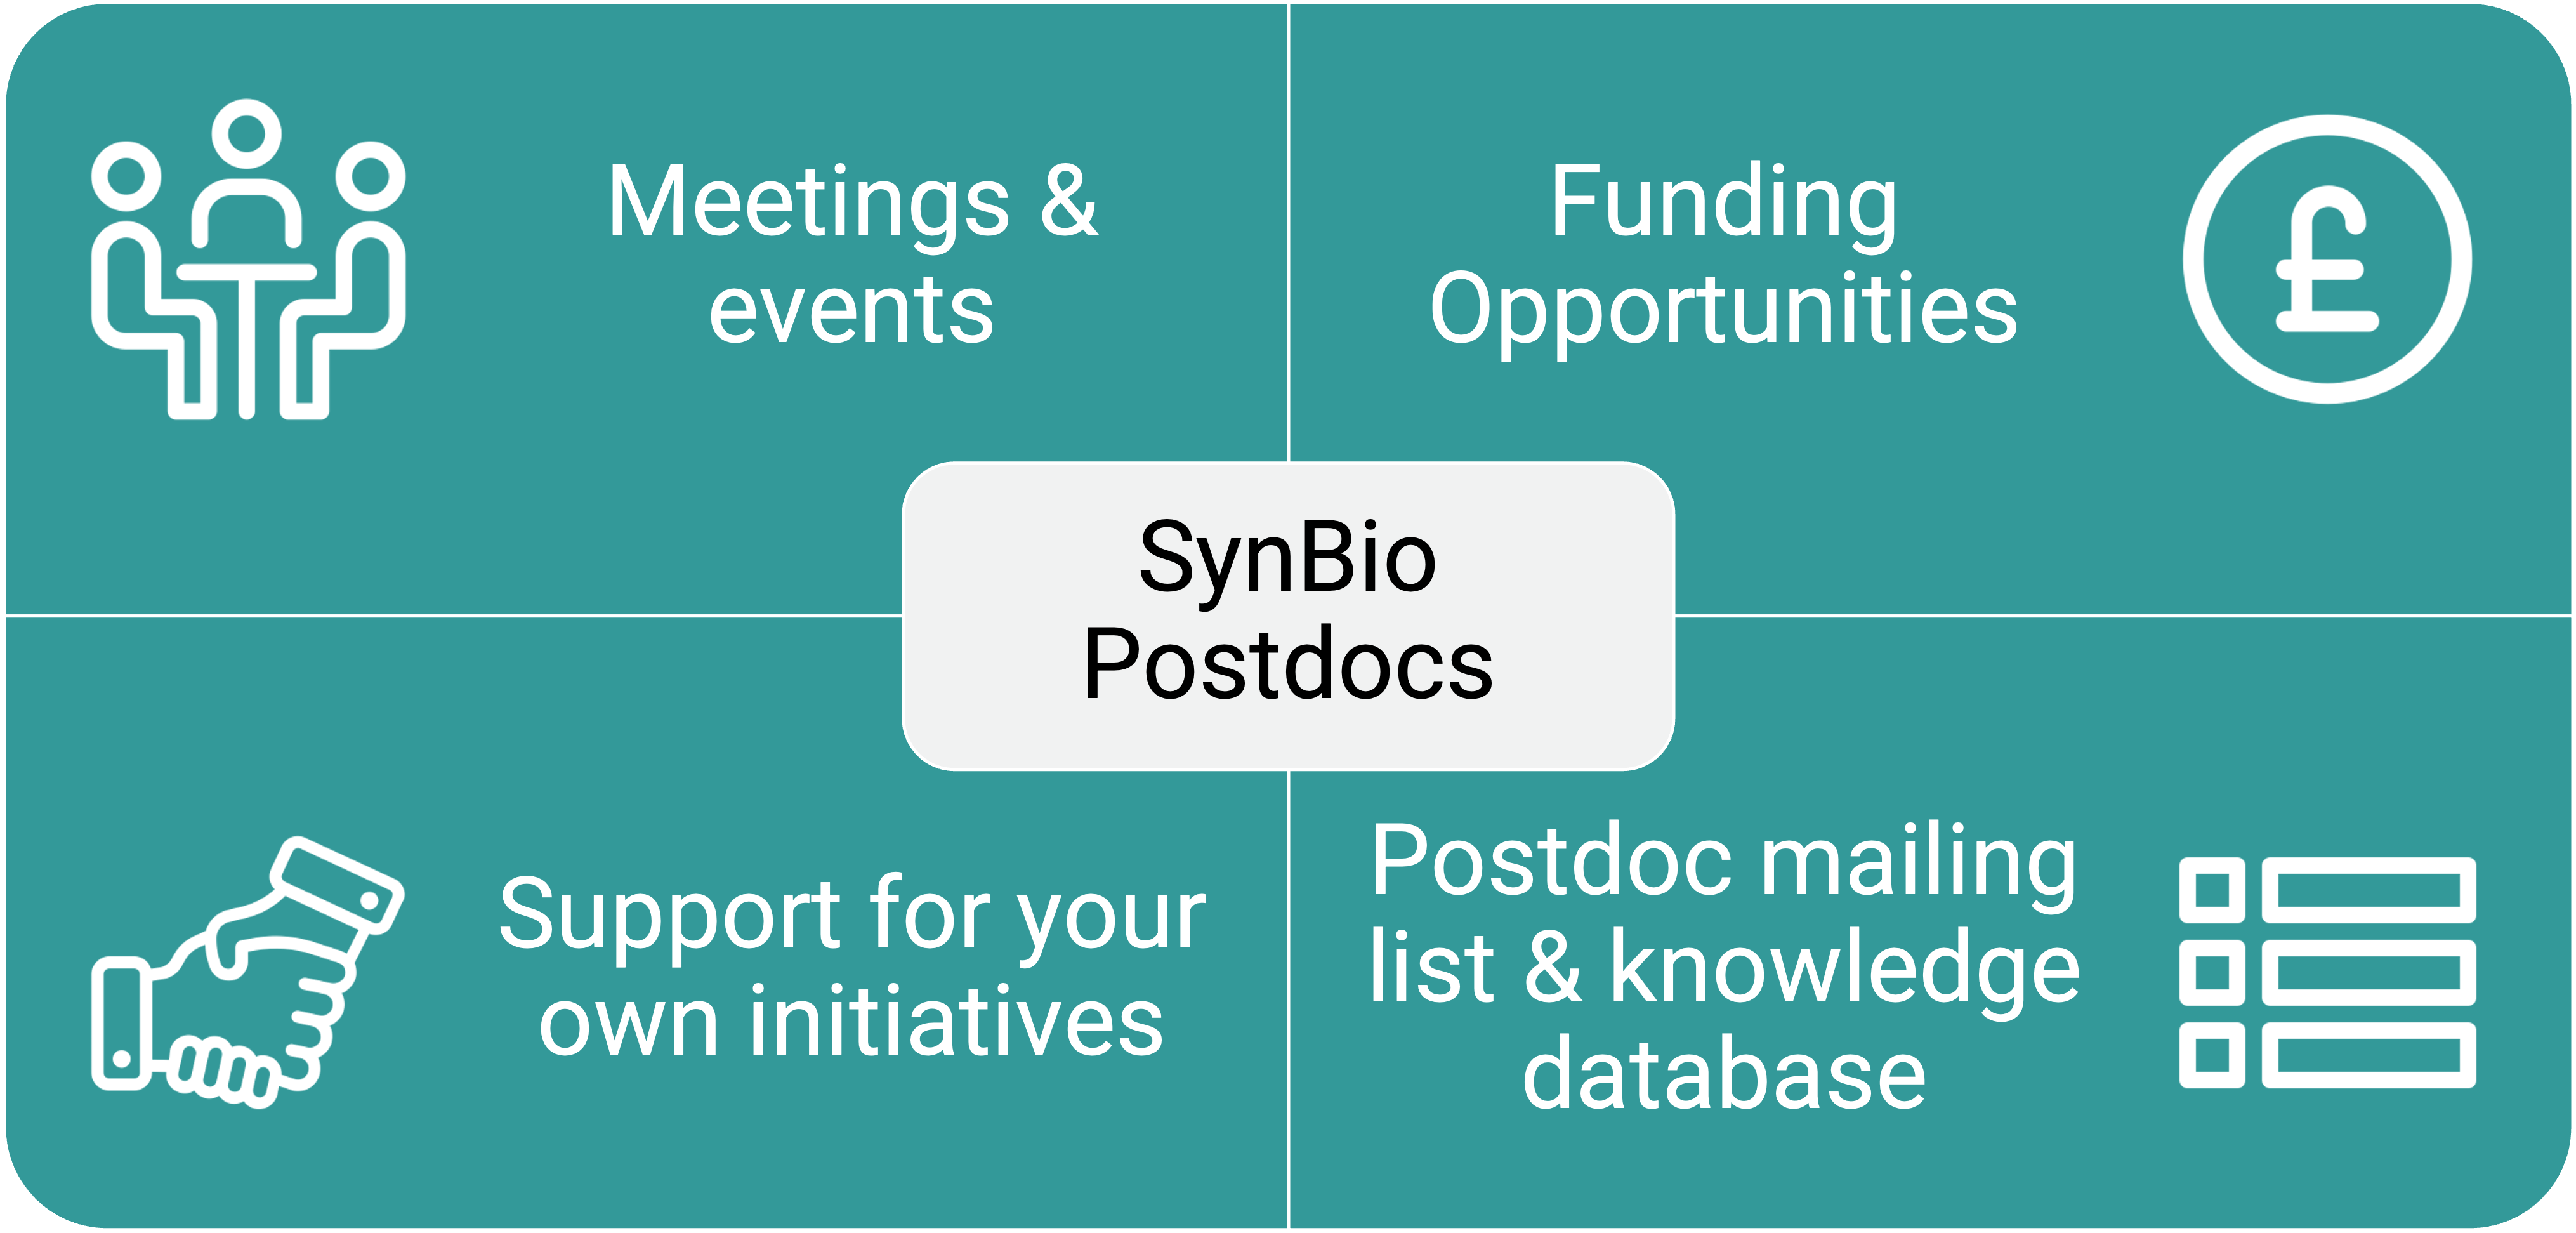 SynBio Postdocs: Meetings and events - Funding Opportunities - Support for your own initiatives - Postdoc mailing list and knowledge database